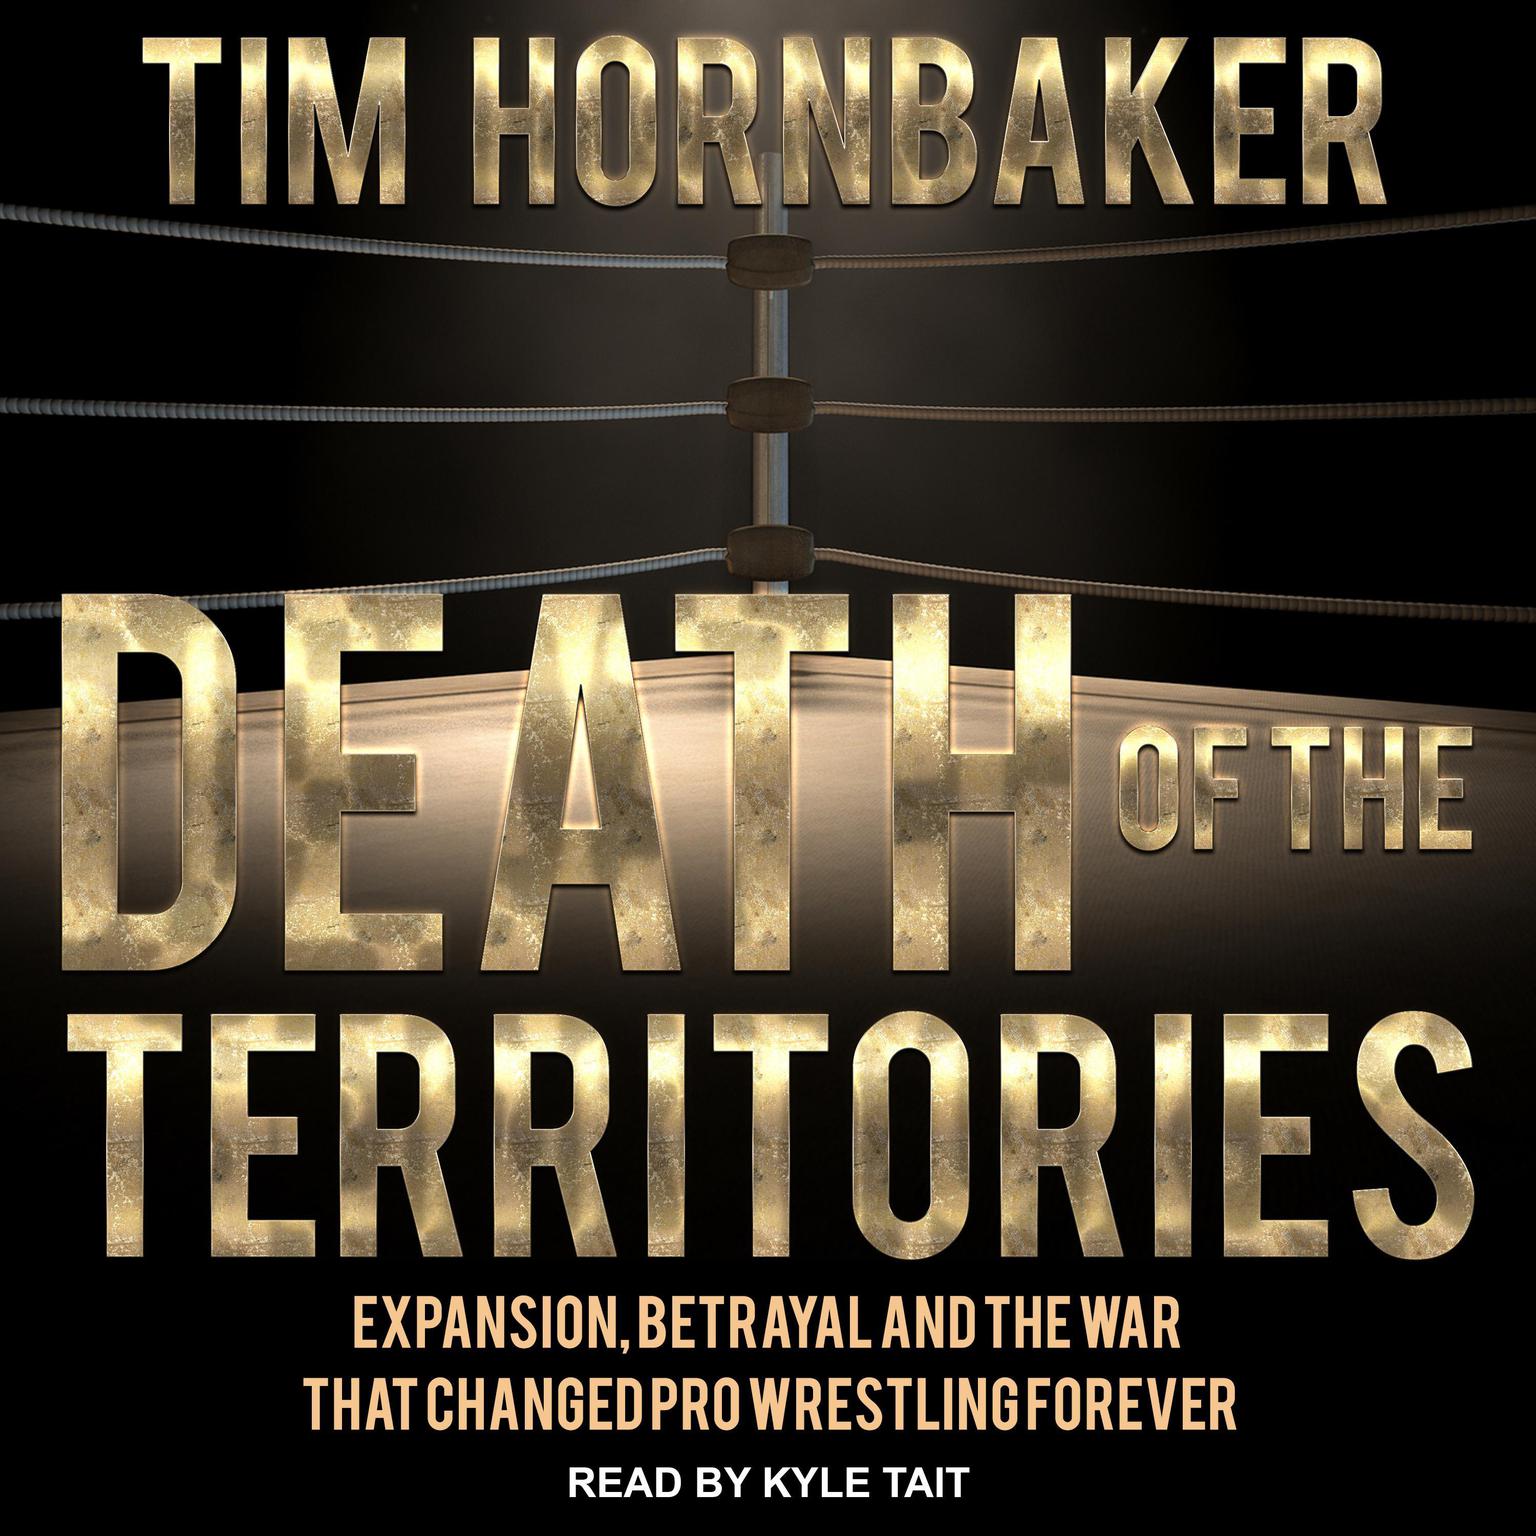 Death of the Territories: Expansion, Betrayal and the War that Changed Pro Wrestling Forever Audiobook, by Tim Hornbaker